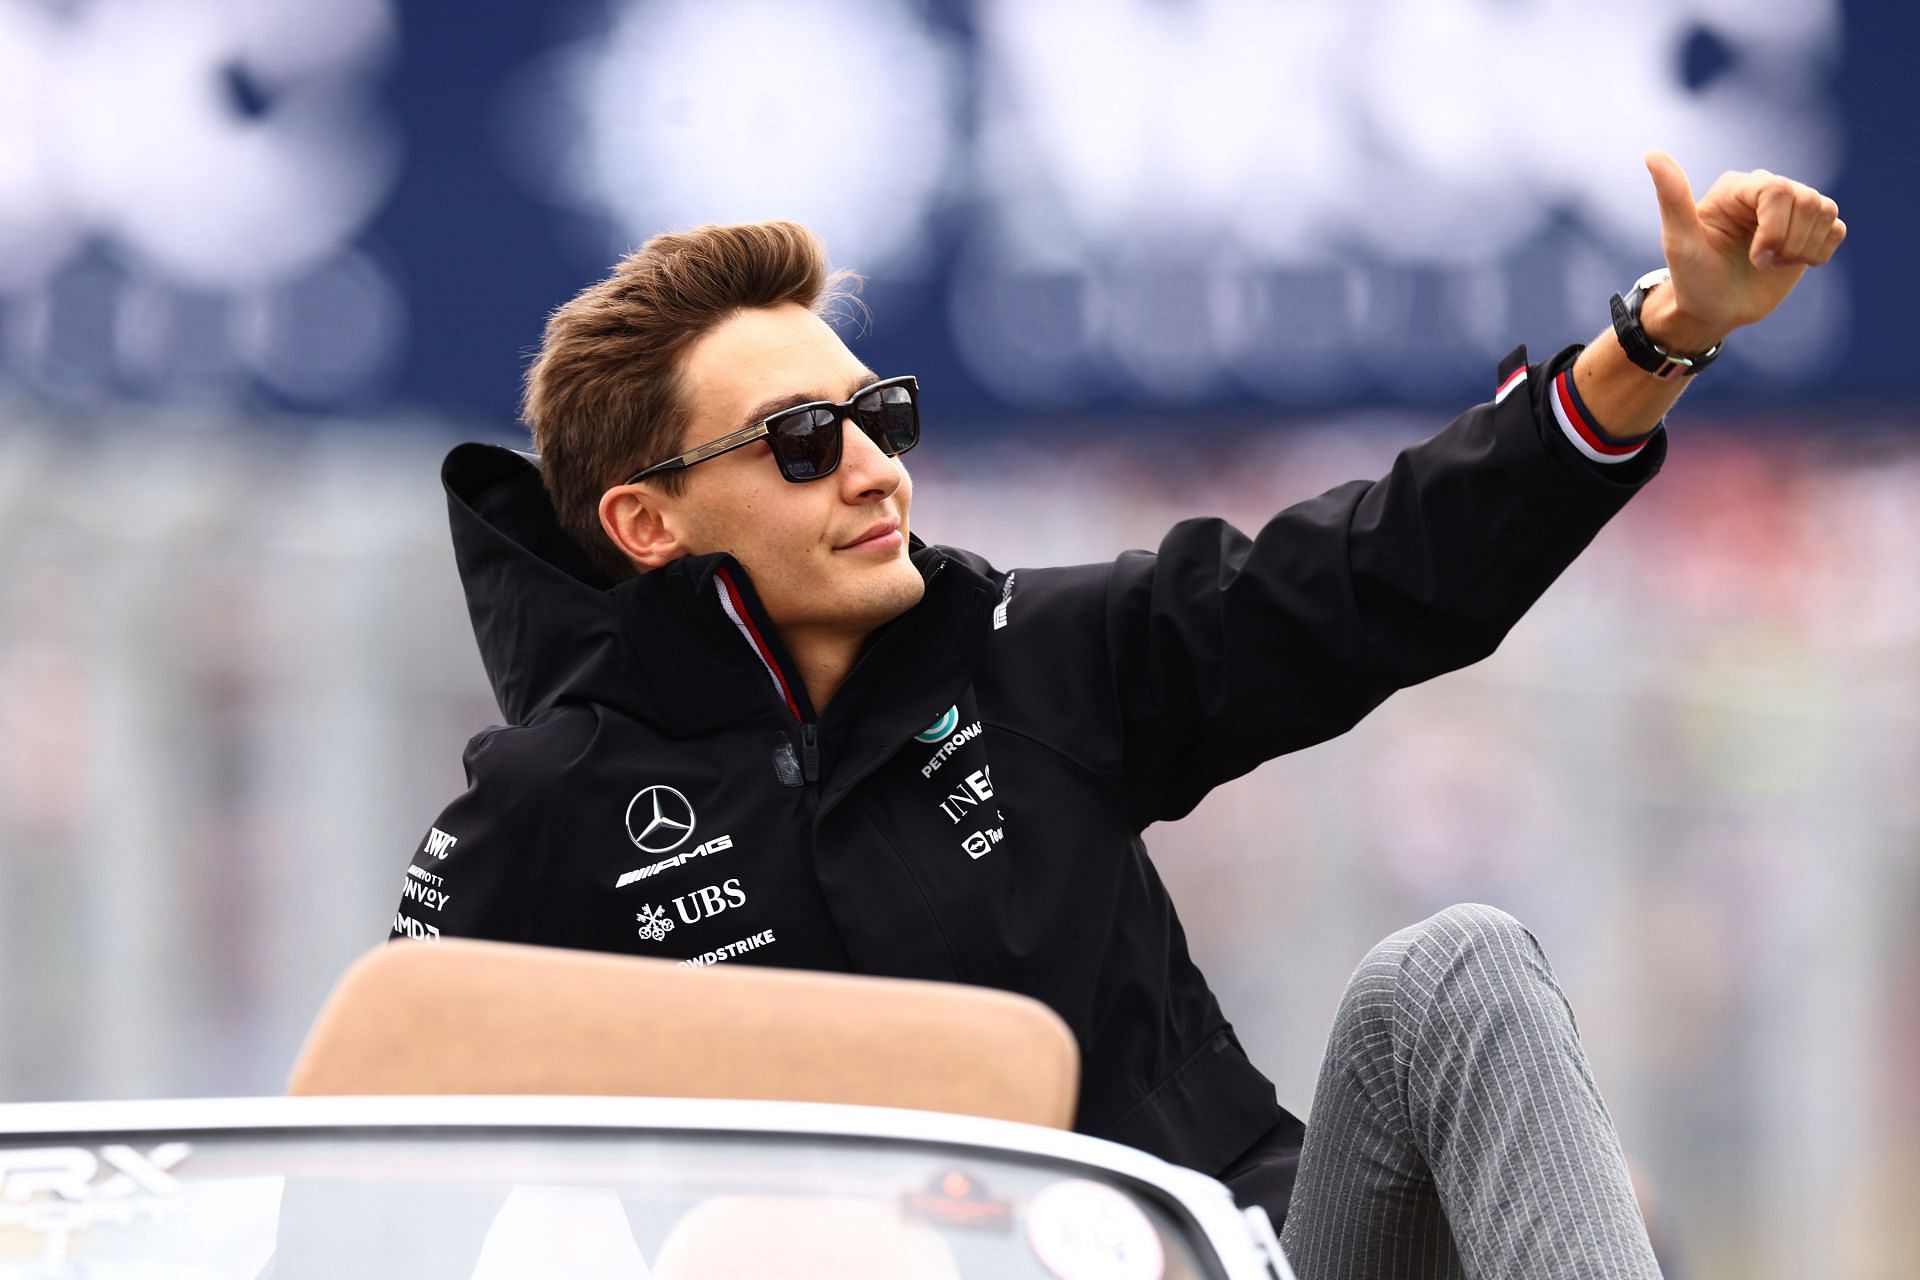 George Russell of Great Britain and Mercedes waves to the crowd on the drivers parade ahead of the F1 Grand Prix of Hungary at Hungaroring on July 31, 2022 in Budapest, Hungary. (Photo by Francois Nel/Getty Images)